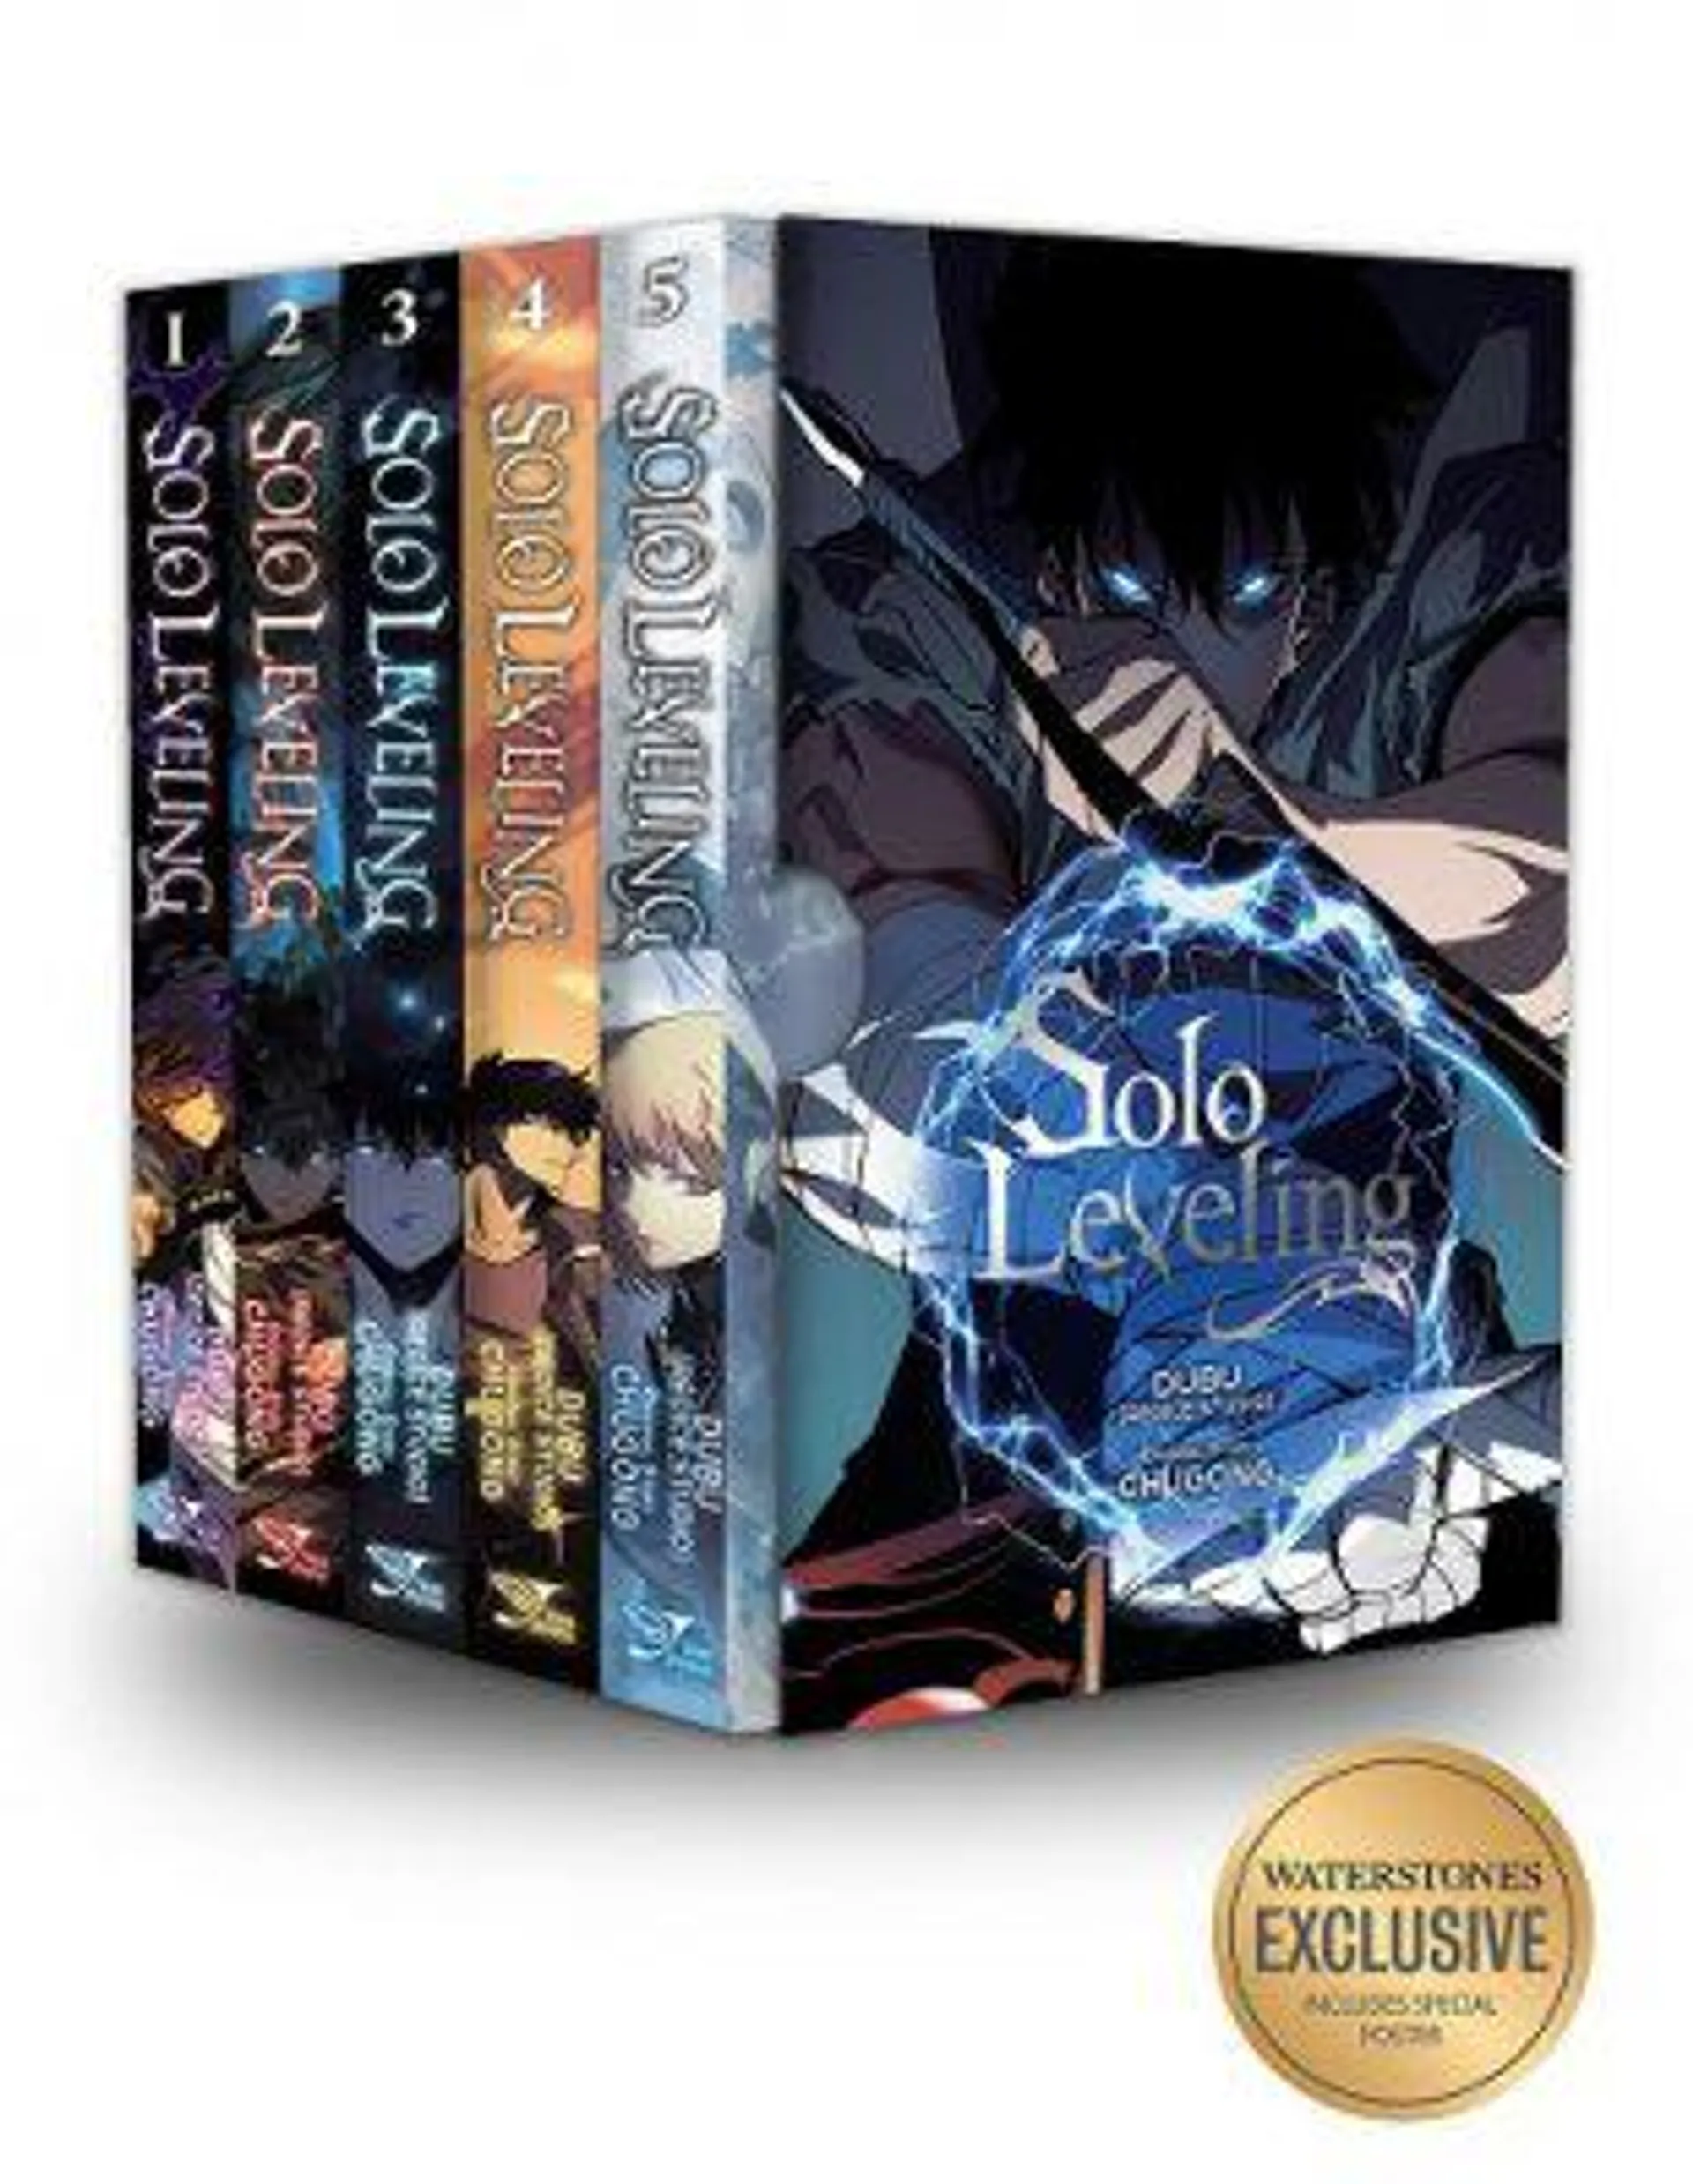 Solo Leveling, vol. 1 - 5 Waterstones Exclusive Box Set (Paperback)